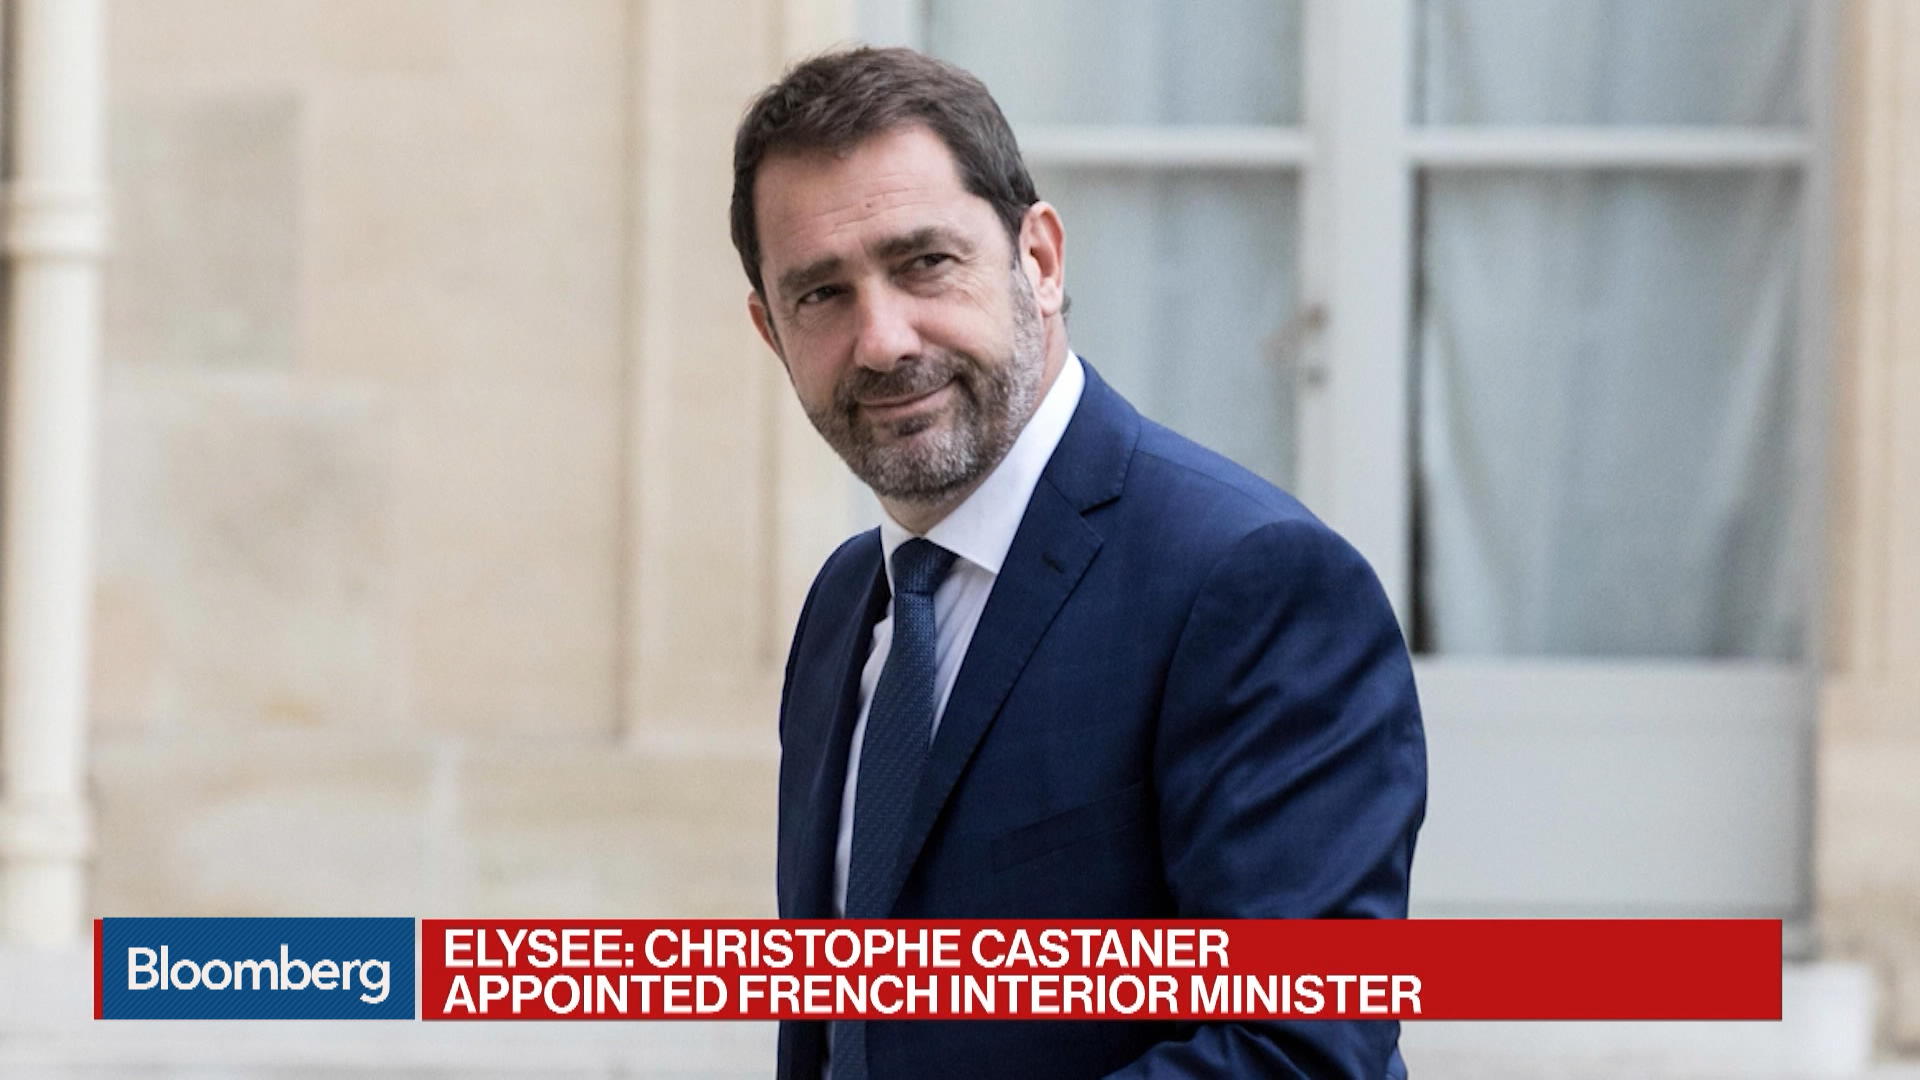 Christophe Castaner Appointed French Interior Minister